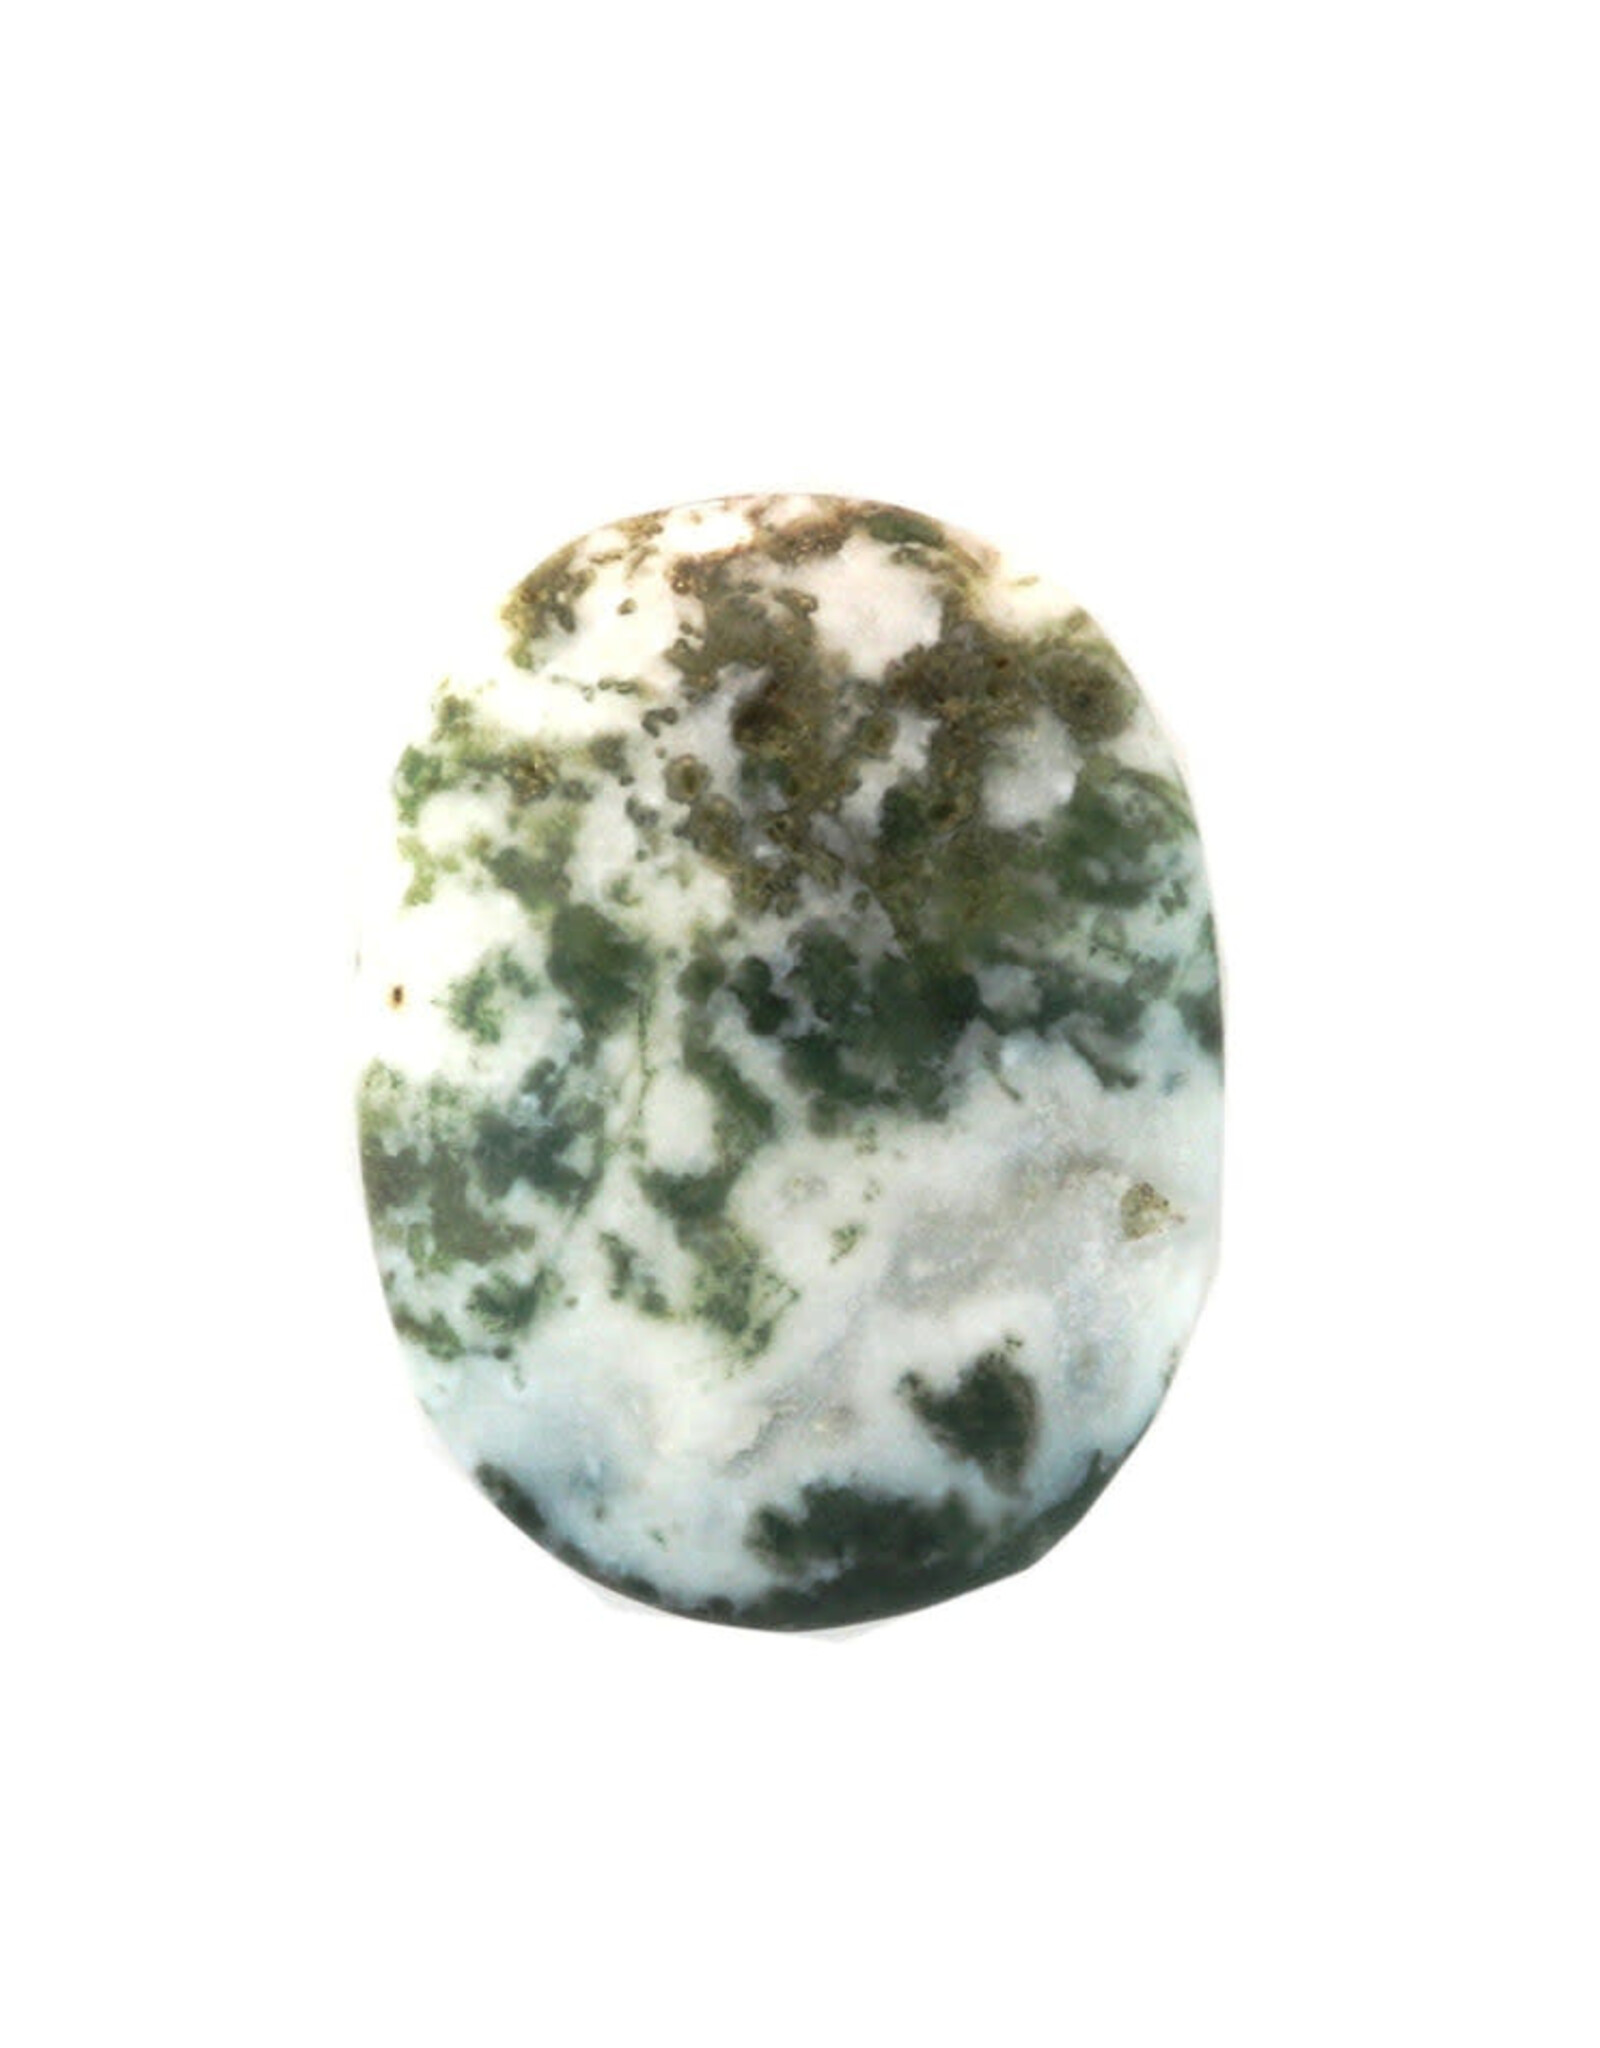 Worry Stone - Green Moss Agate